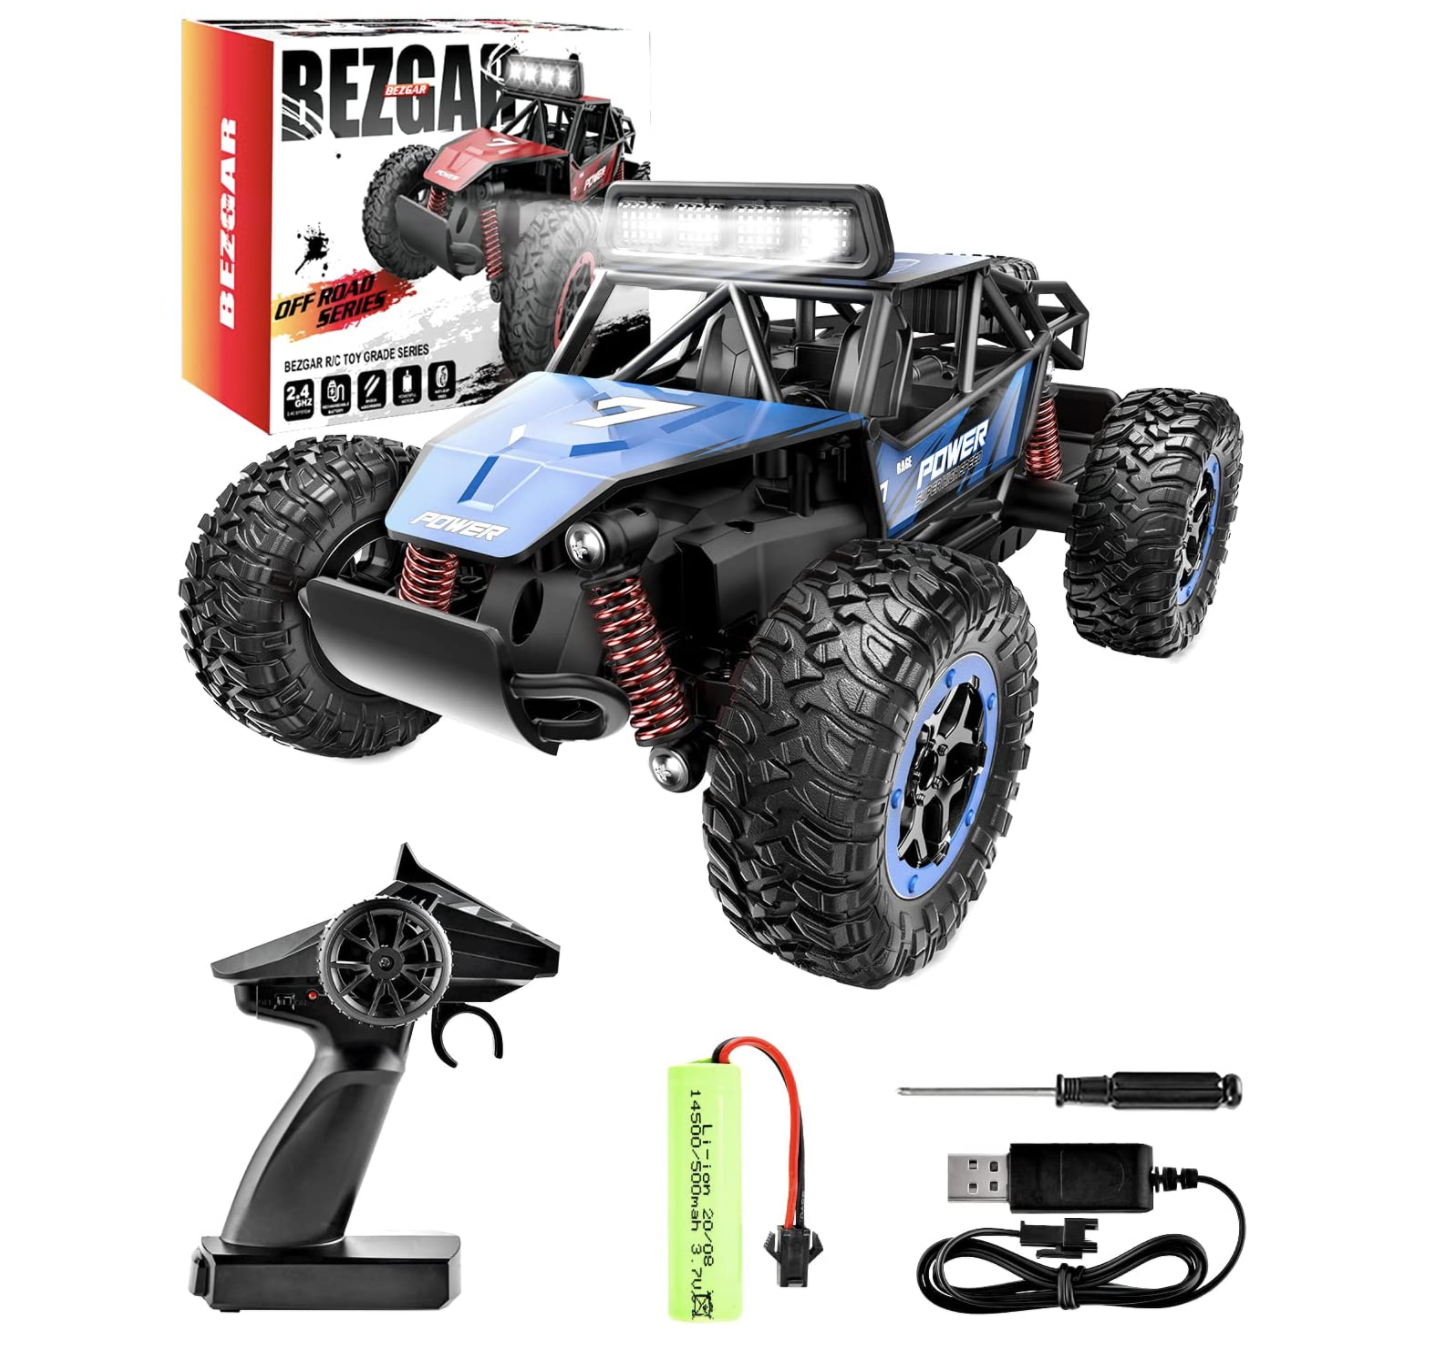 Connects to phone original cost $199! 6 wheel drive R/C car with camera 